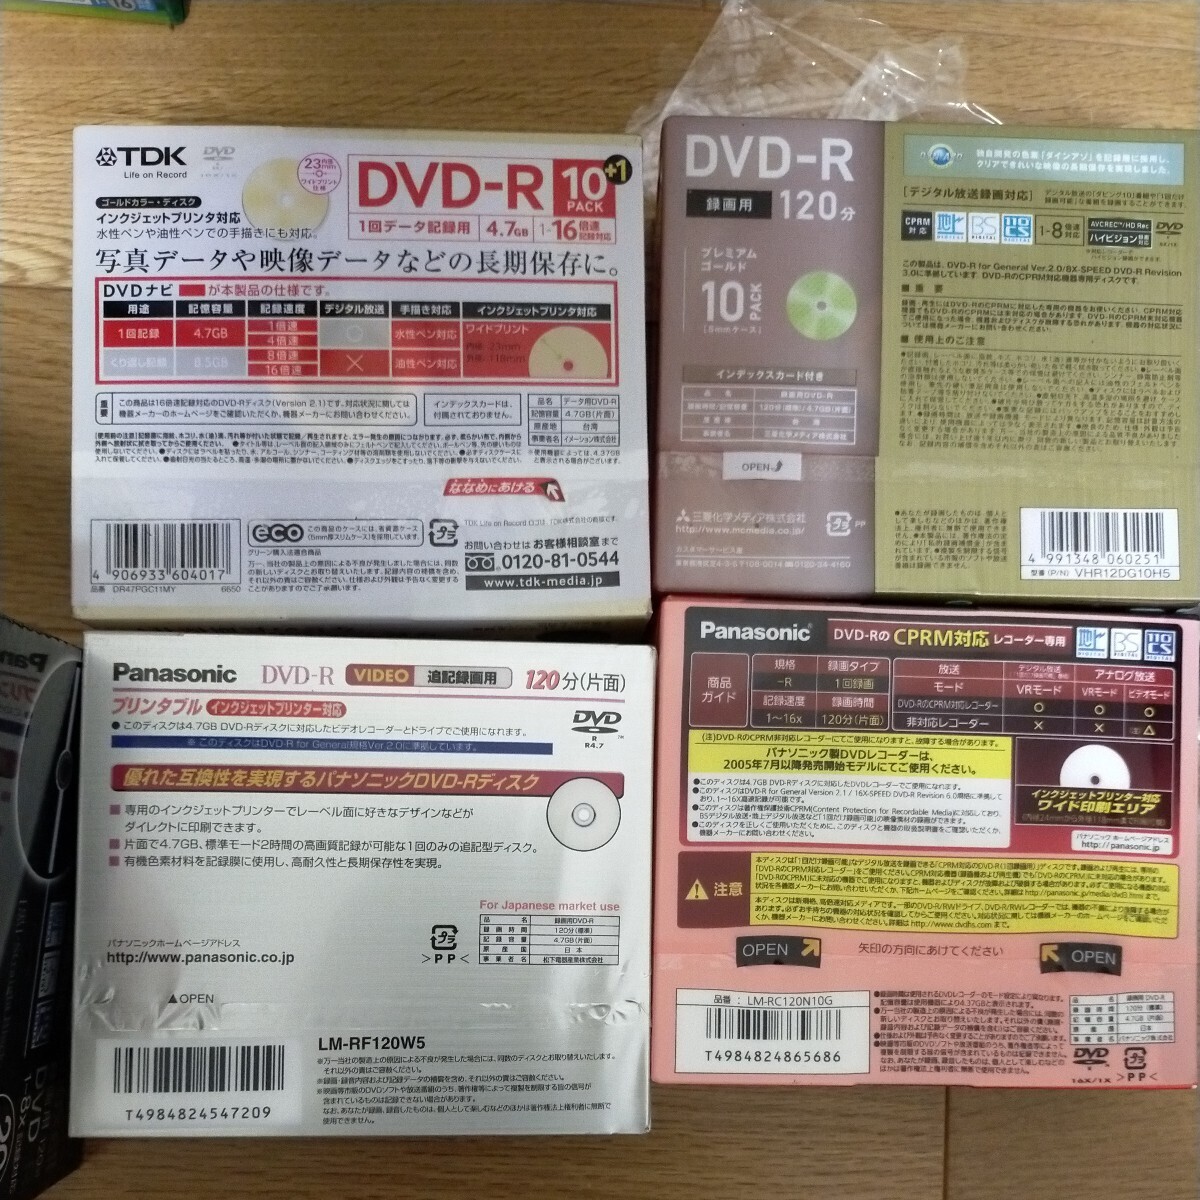 DVD-R Verbatim Victor maxell Panasonic TDK NEC summarize large amount set 120 size including in a package un- possible JVC Victor mak cell Panasonic 